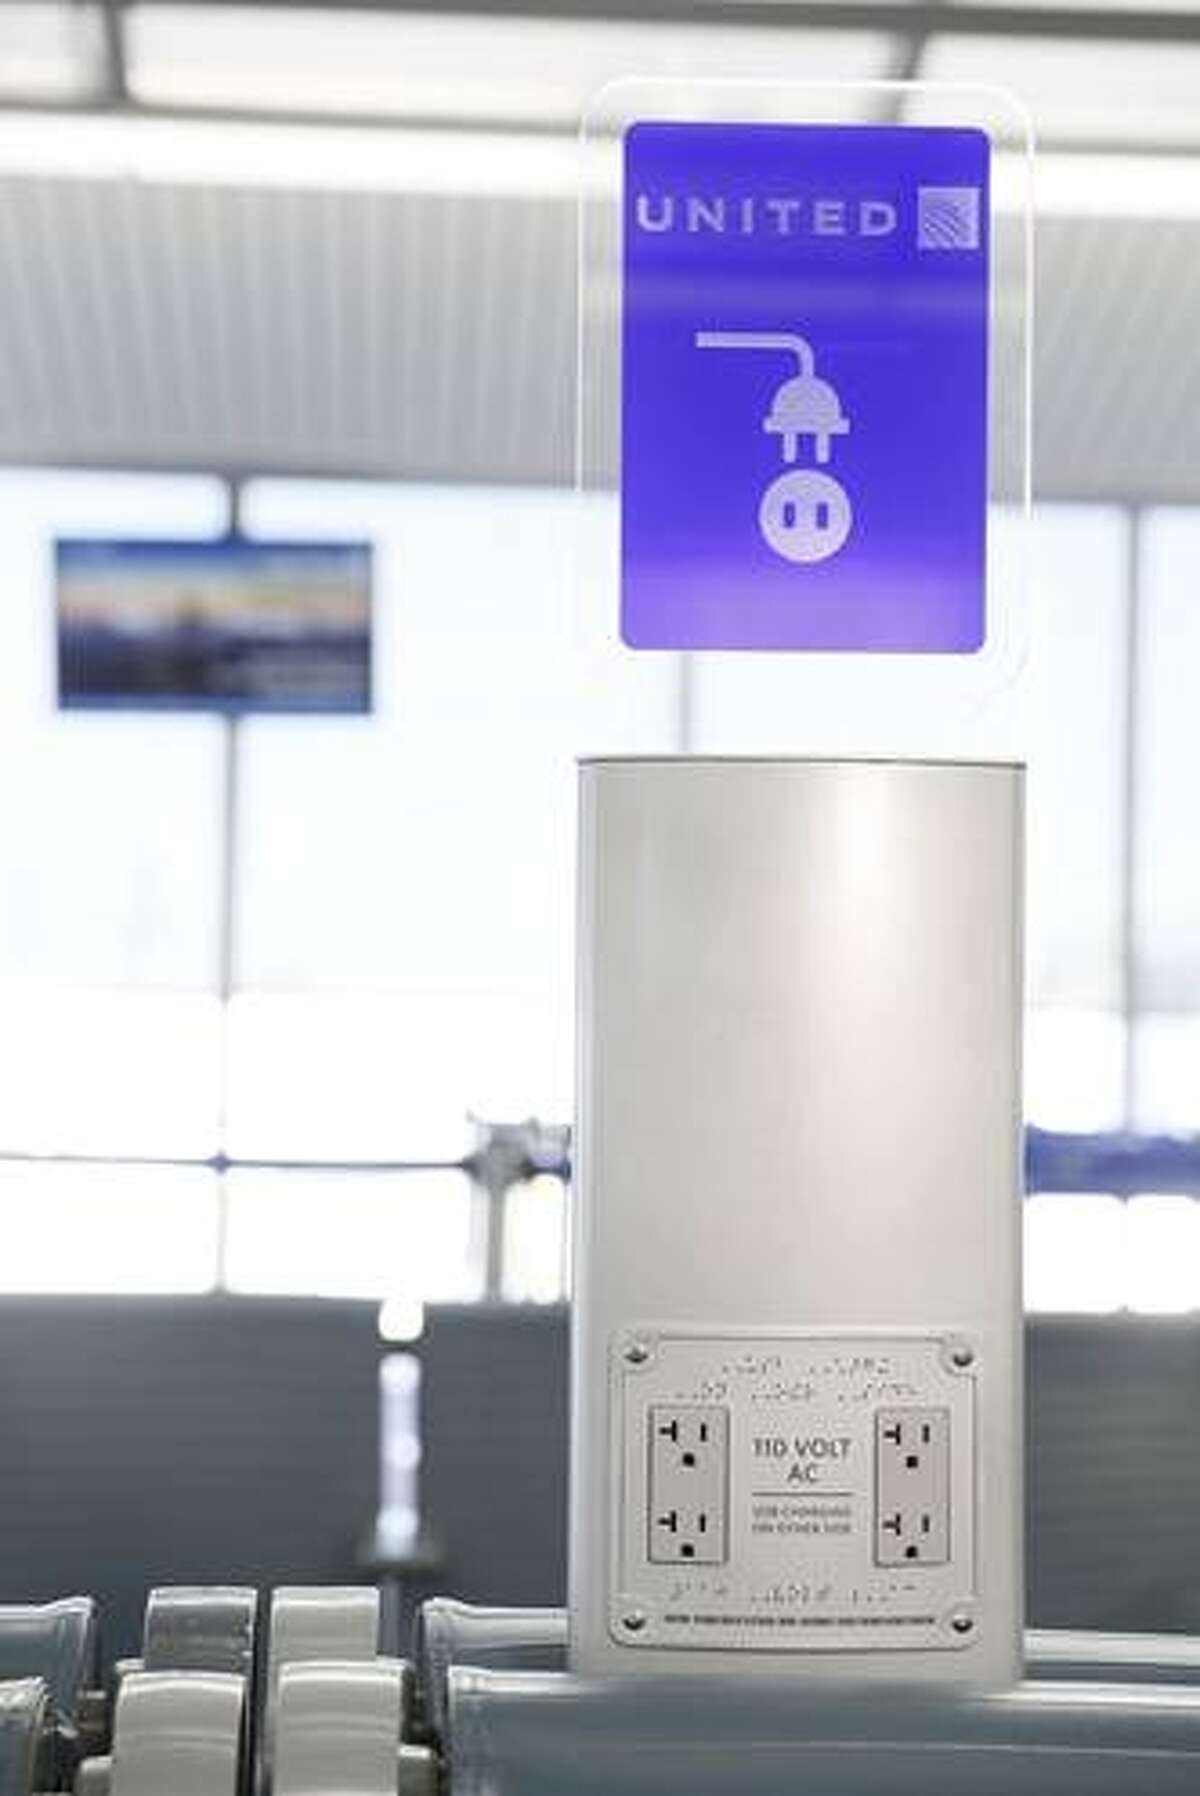 United Airlines will install electronic charging stations at hubs it serves around the country, including Houston.